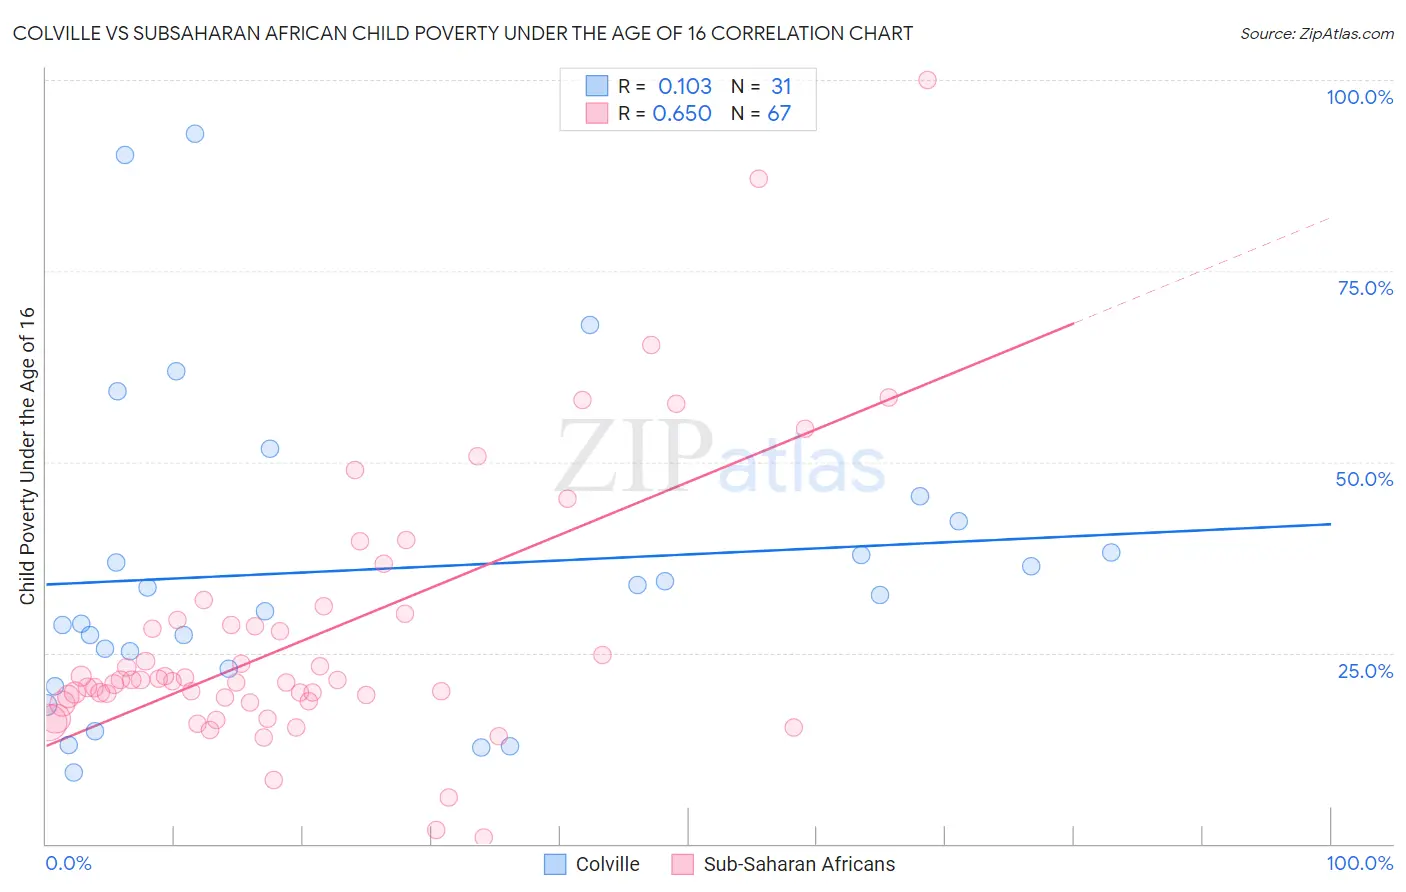 Colville vs Subsaharan African Child Poverty Under the Age of 16